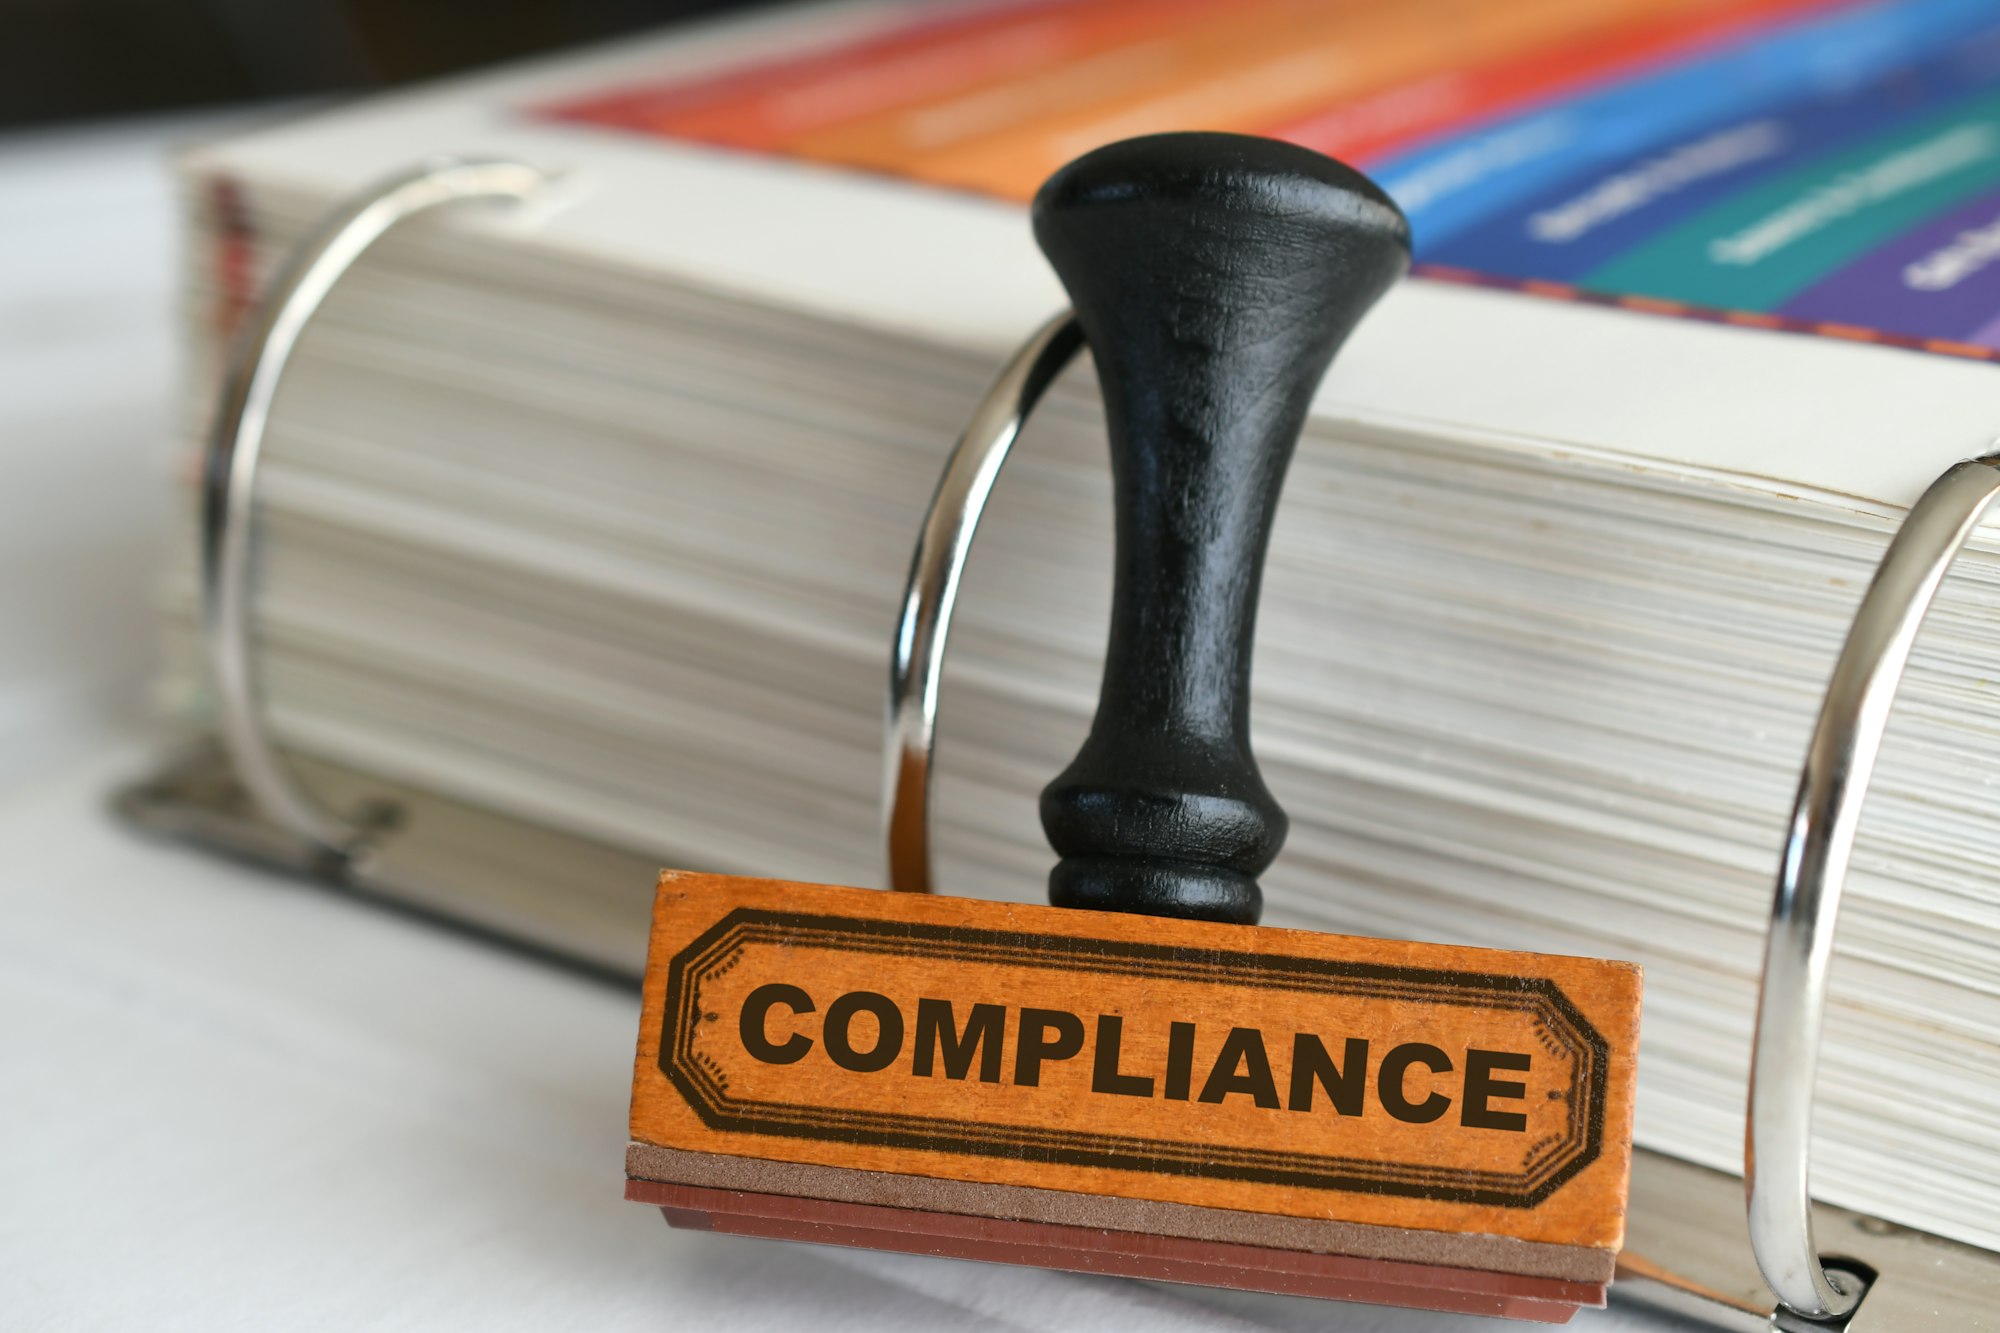 Compliance rubber stamp by binder of rules guidelines, changing procedures to adhere to regulations